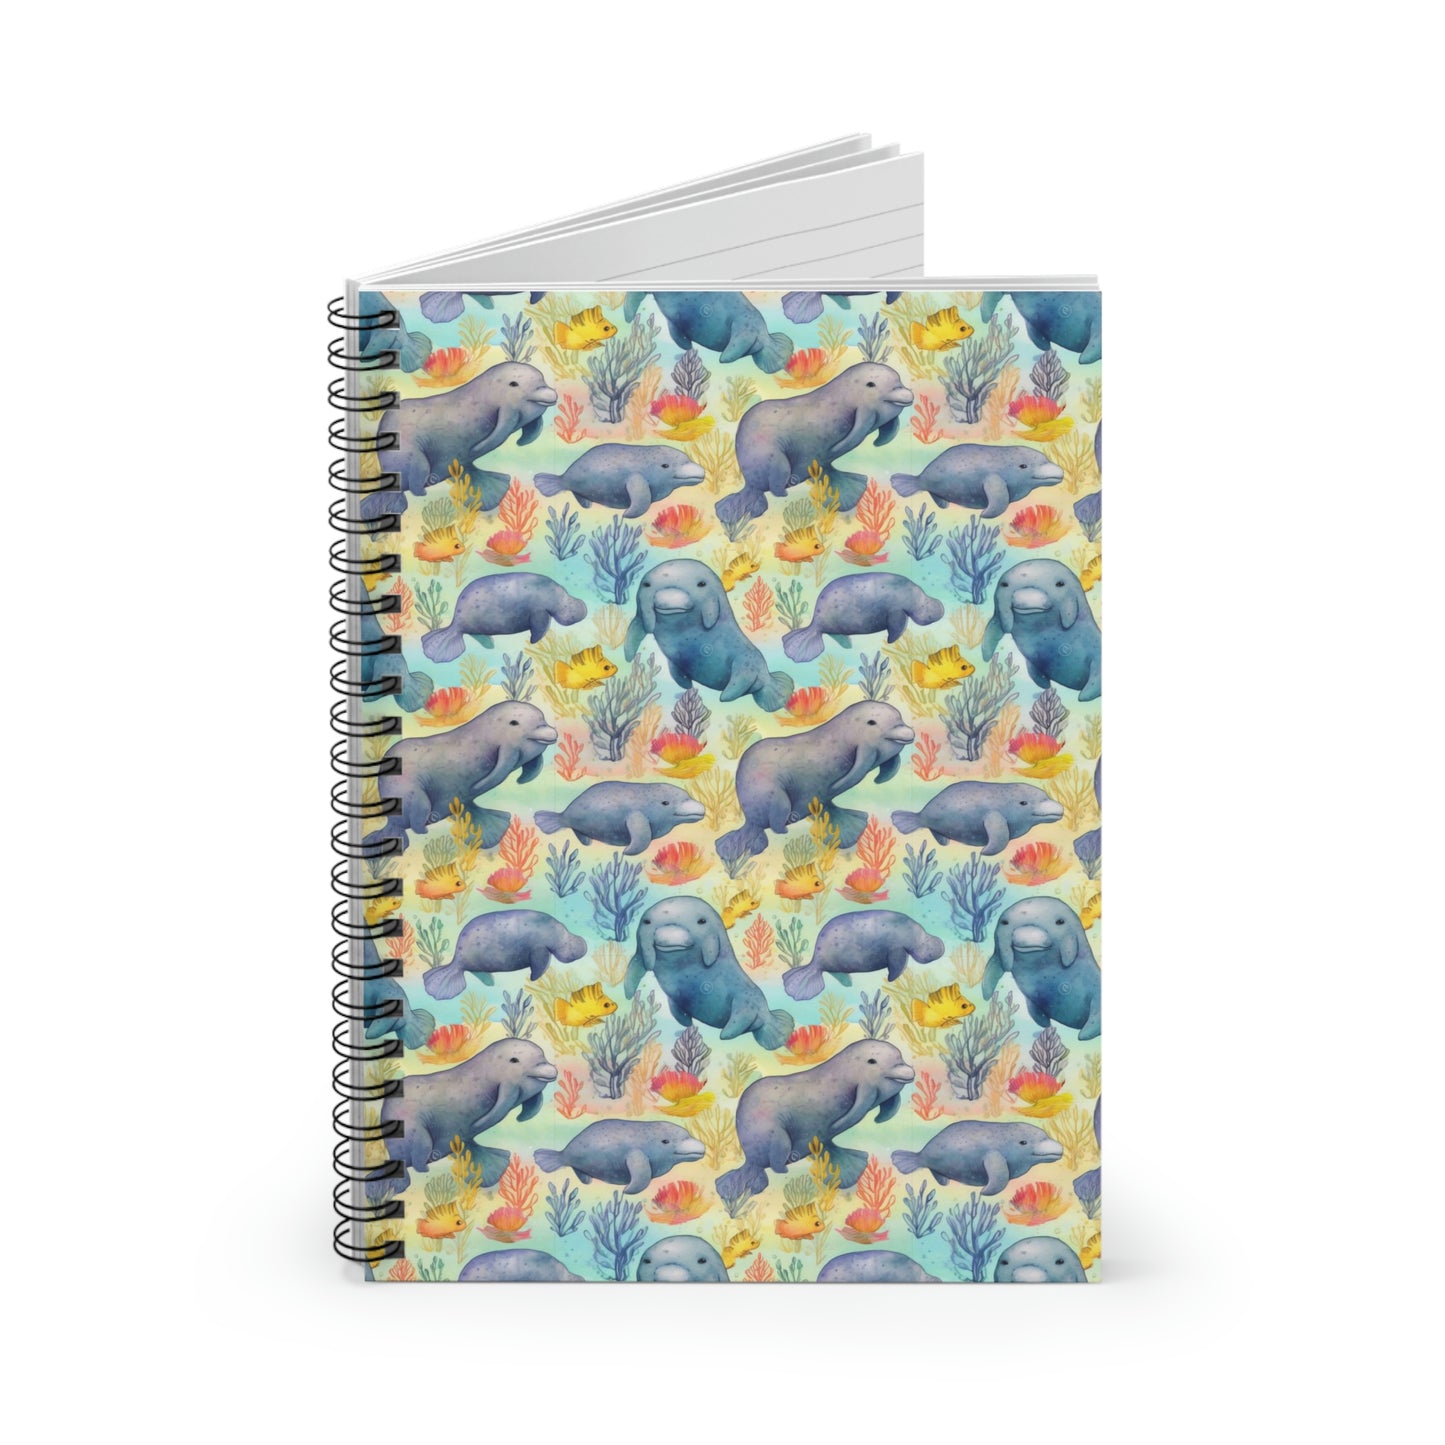 Manatee Spiral Notebook, Watercolor Fish Ocean Sea Pattern Design Journal Traveler Notepad Ruled Line Book Paper Pad Work Aesthetic Starcove Fashion